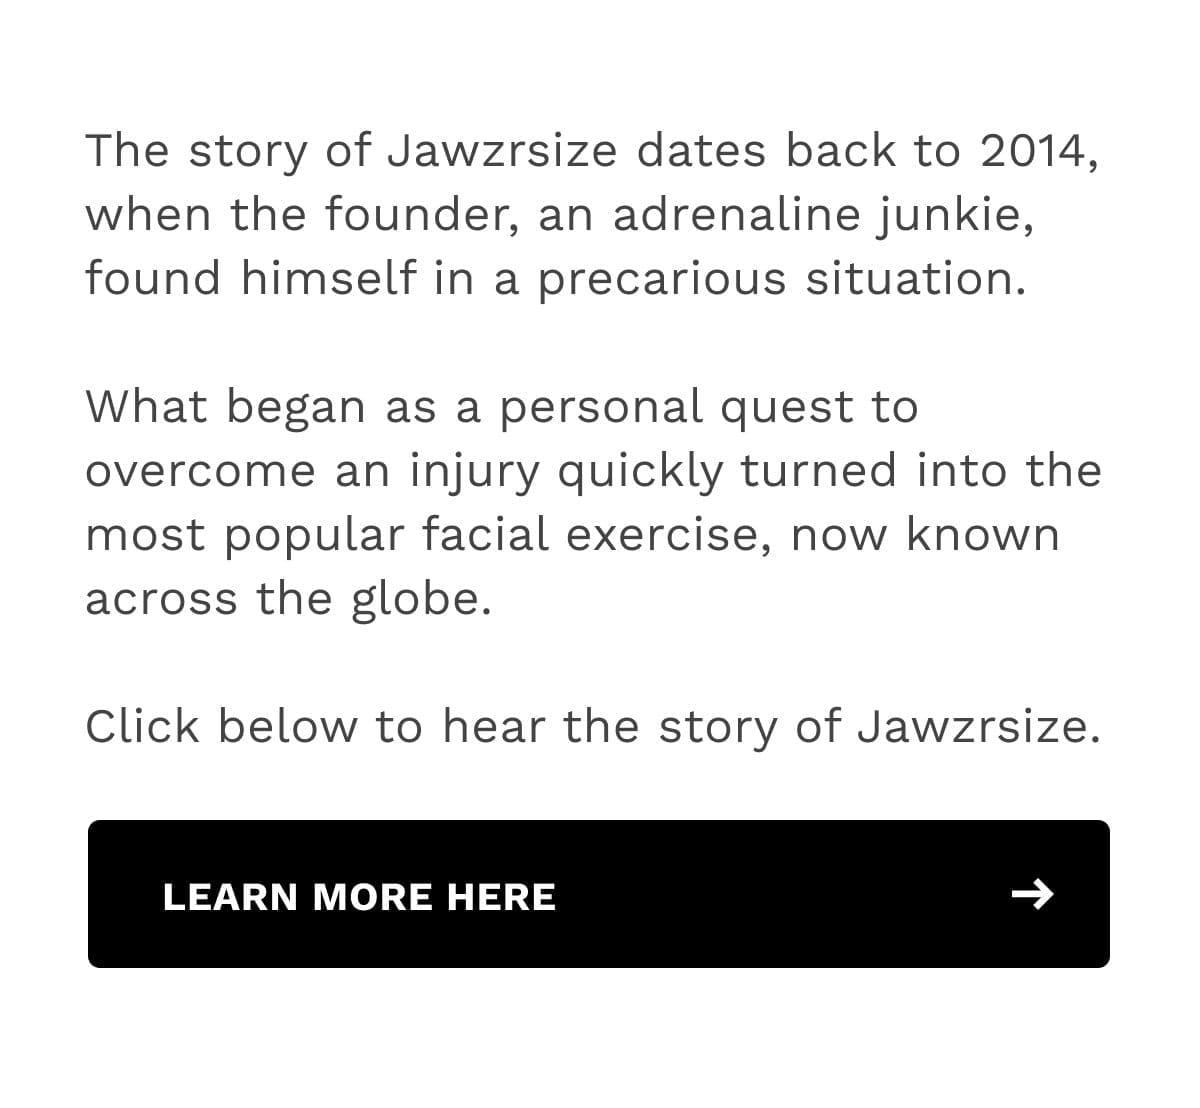 The story of Jawzrsize dates back to 2014, when the founder, an adrenaline junkie, found himself in a precarious situation. What began as a personal quest to overcome an injury quickly turned into the most popular facial exercise, now known across the globe. Click below to hear the story of Jawzrsize.